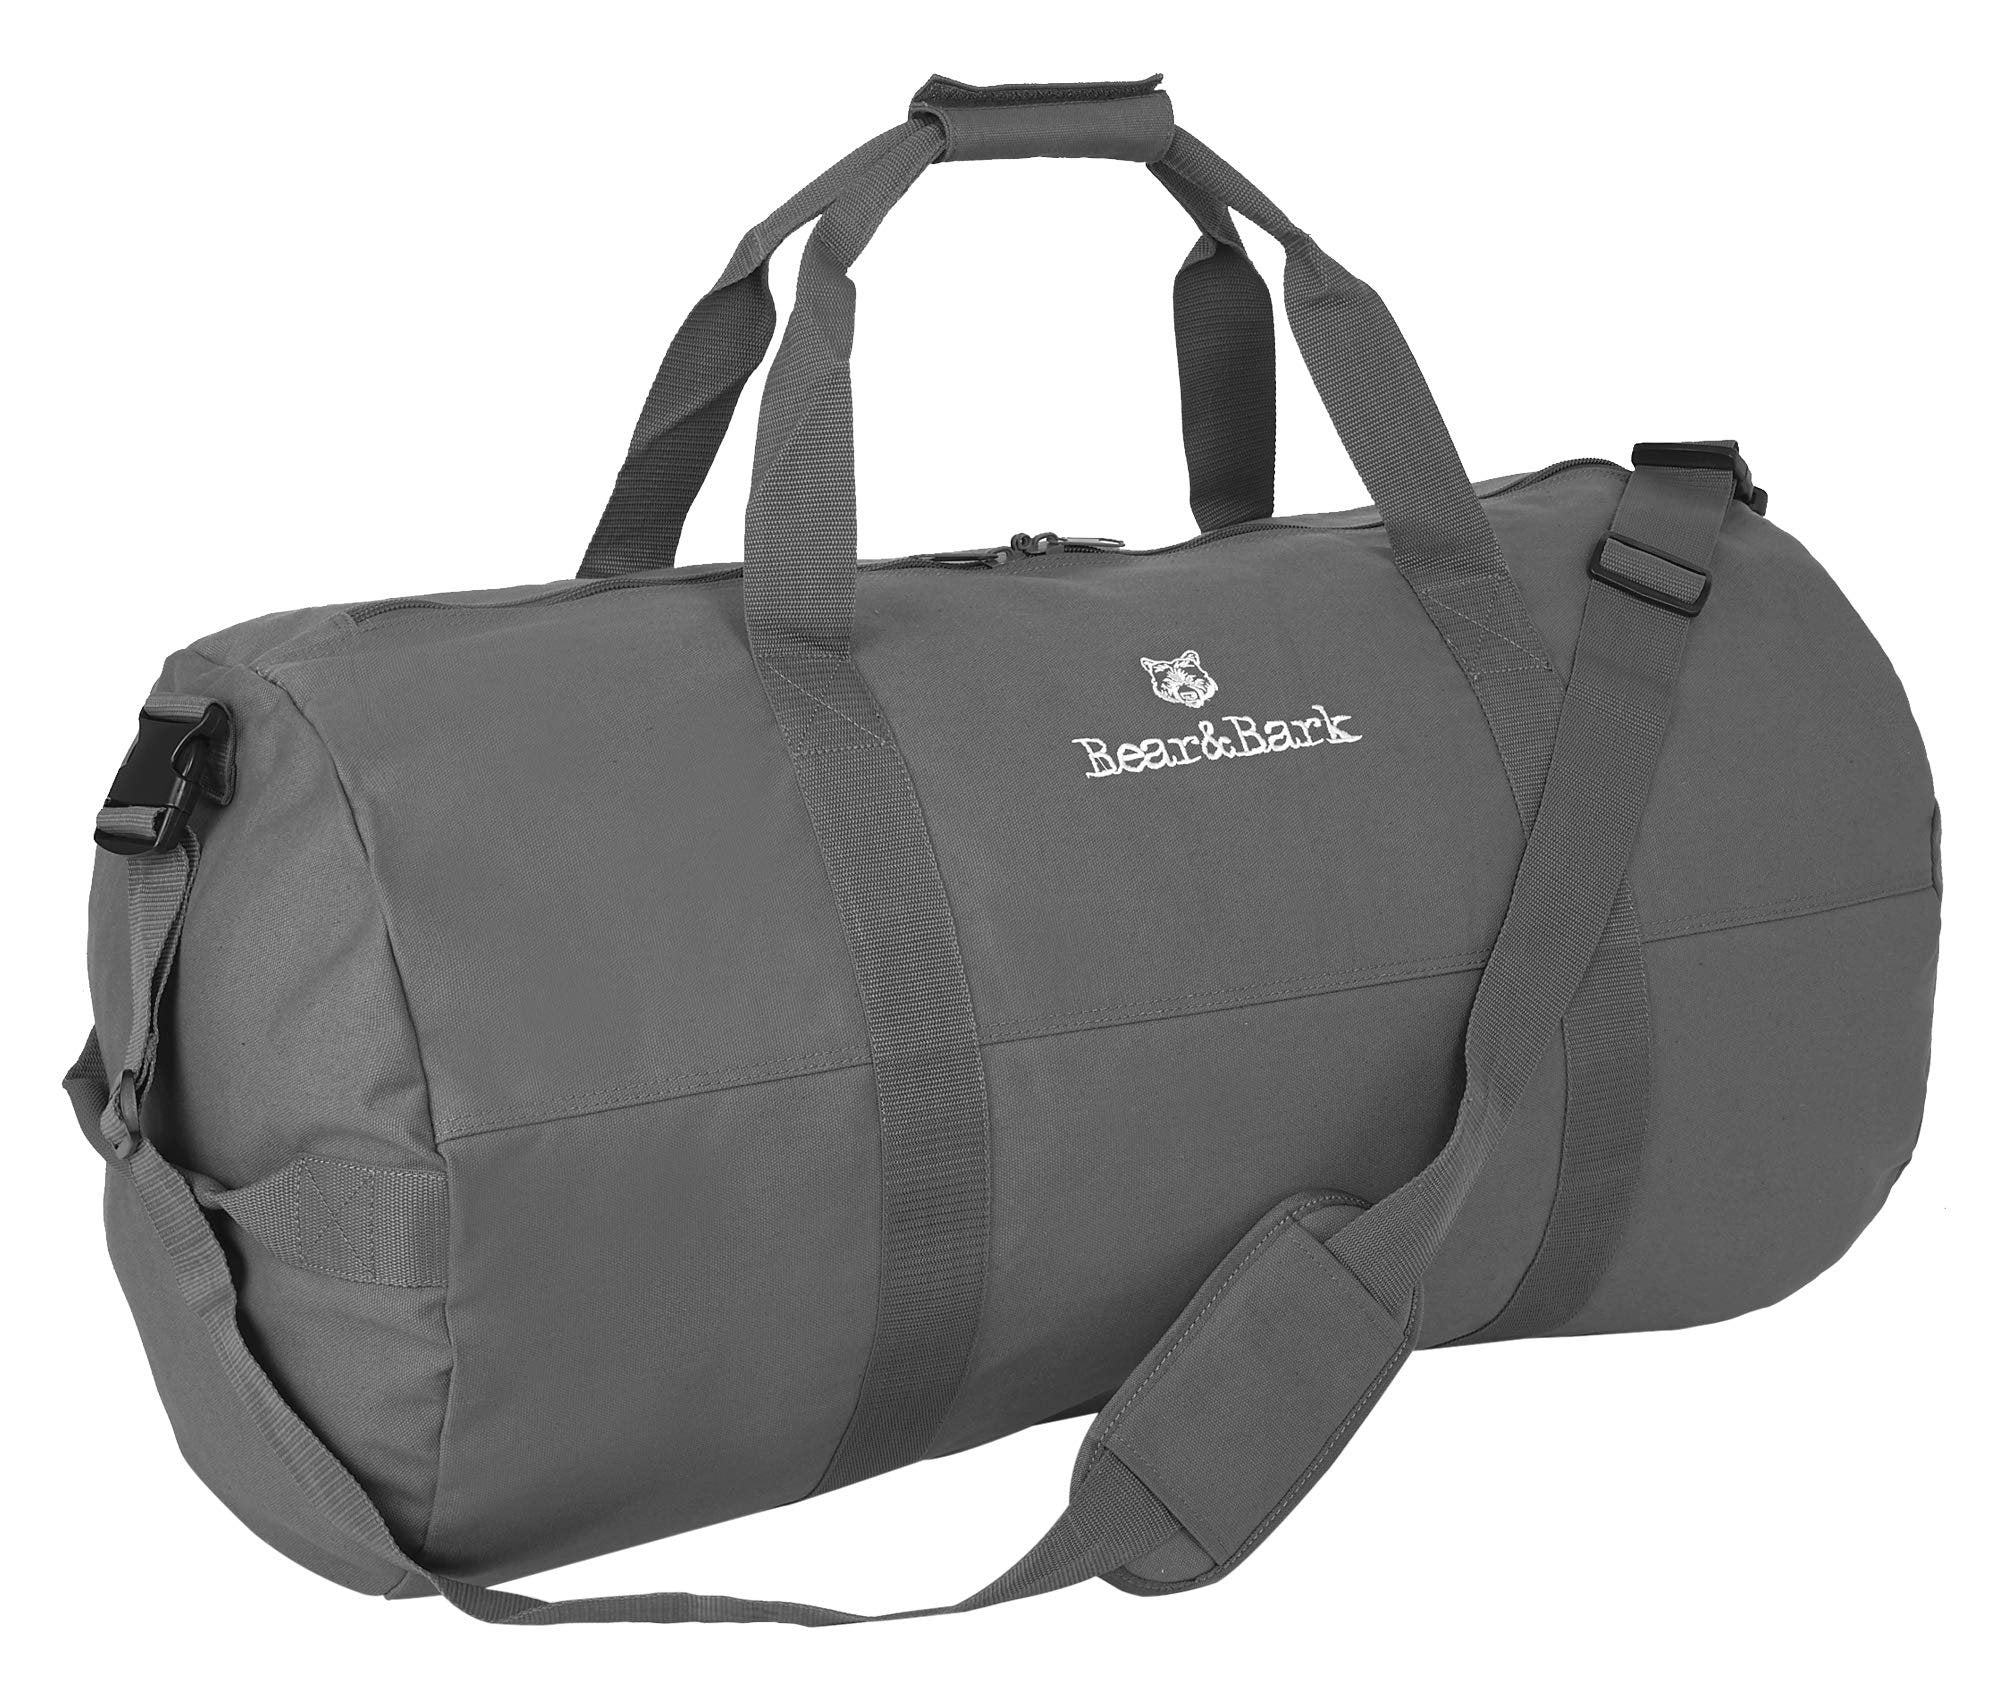 Bear&Bark X-Large Gray Canvas Duffle Bag - 46" X 20" - 236.8L - Military Style for Men and Women - College, Backpacking, Travel